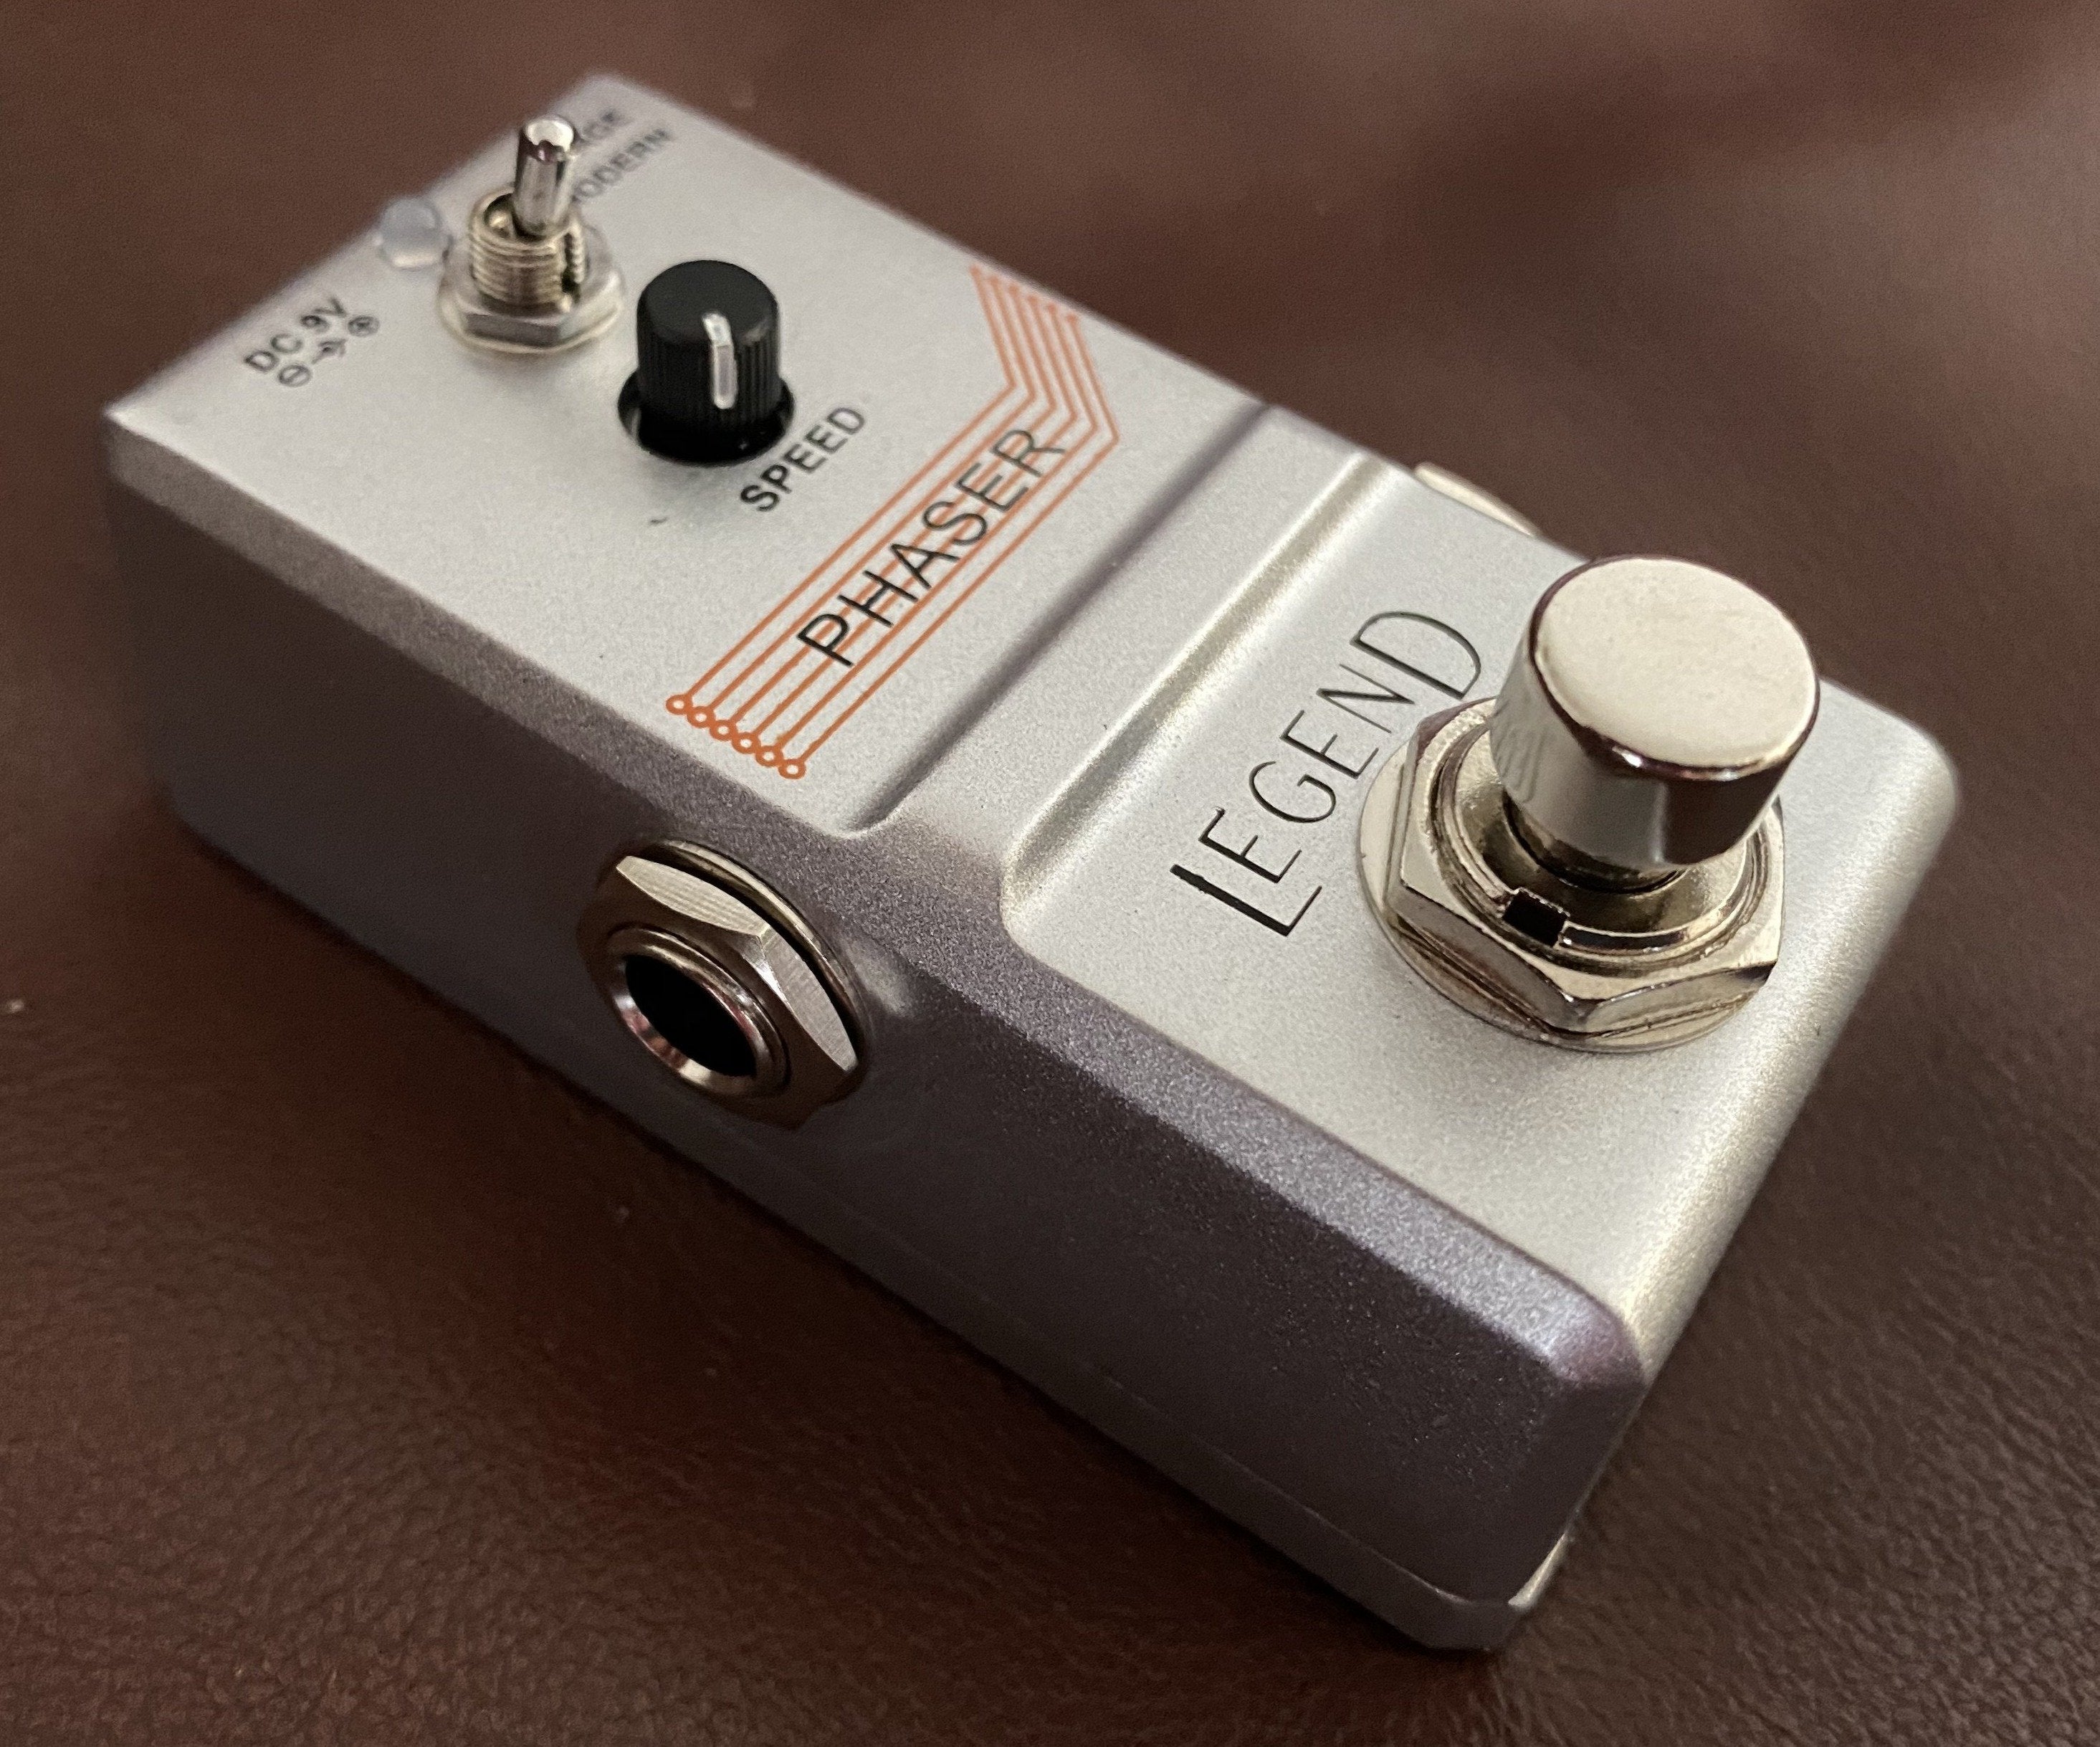 SMJ LEGEND Series Phaser Pedal, Accessory for sale at Richards Guitars.